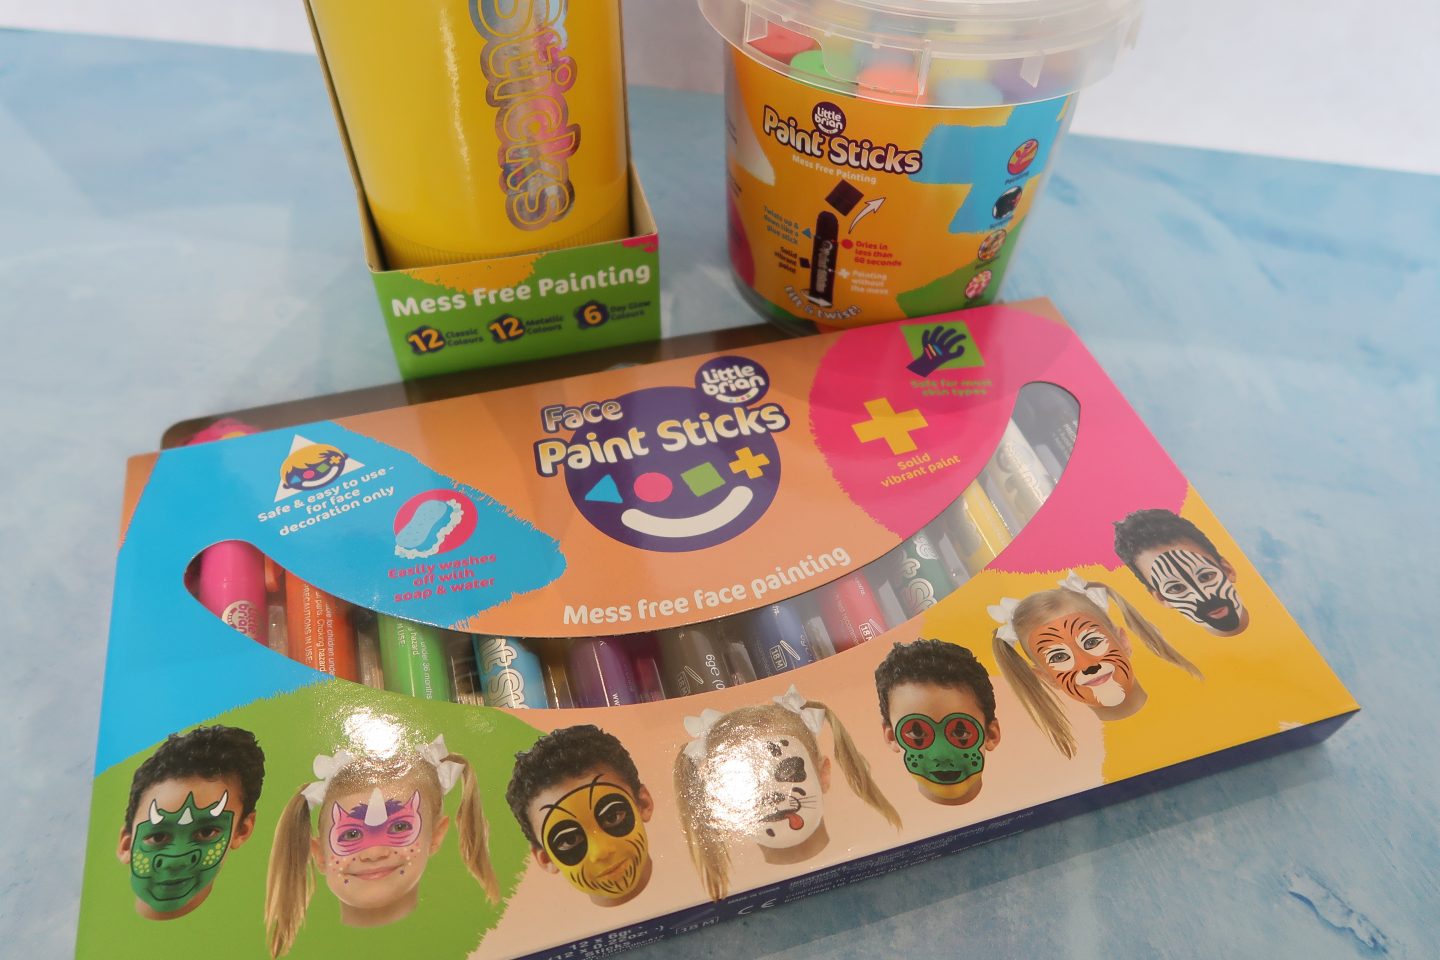 Little Brian face paints and paint sticks in their packaging